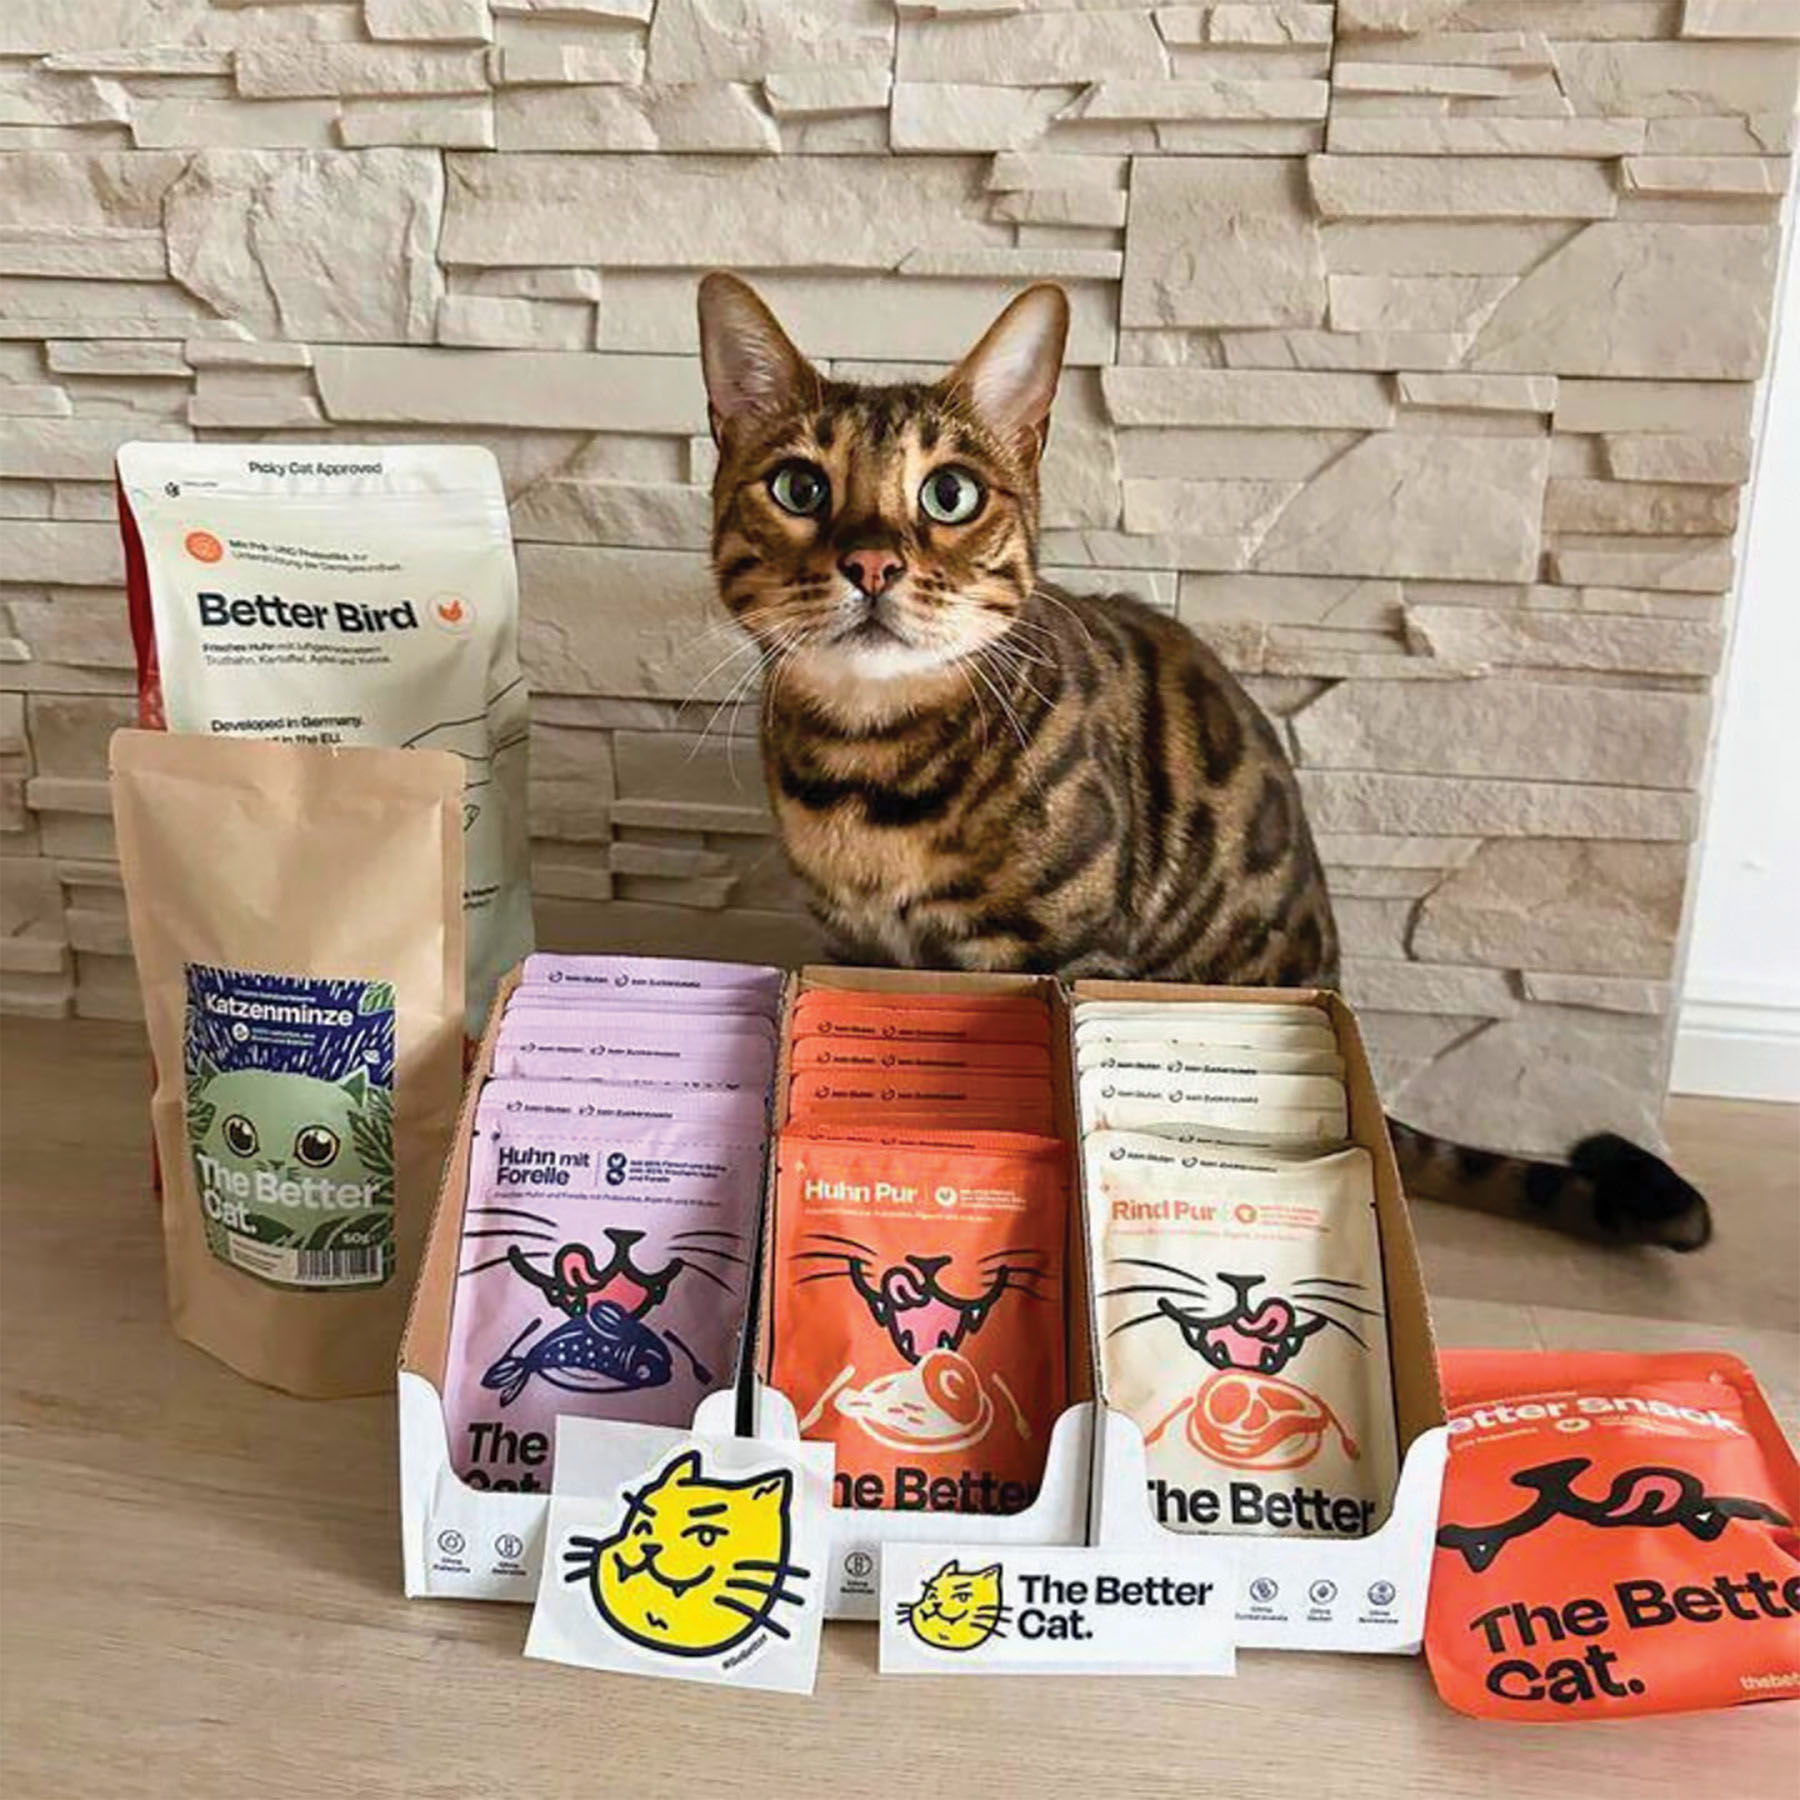 The Better Cat originally launched with a line of dry cat foods but has since expanded its cat-centric offerings to include wet formats, treats and even supplies